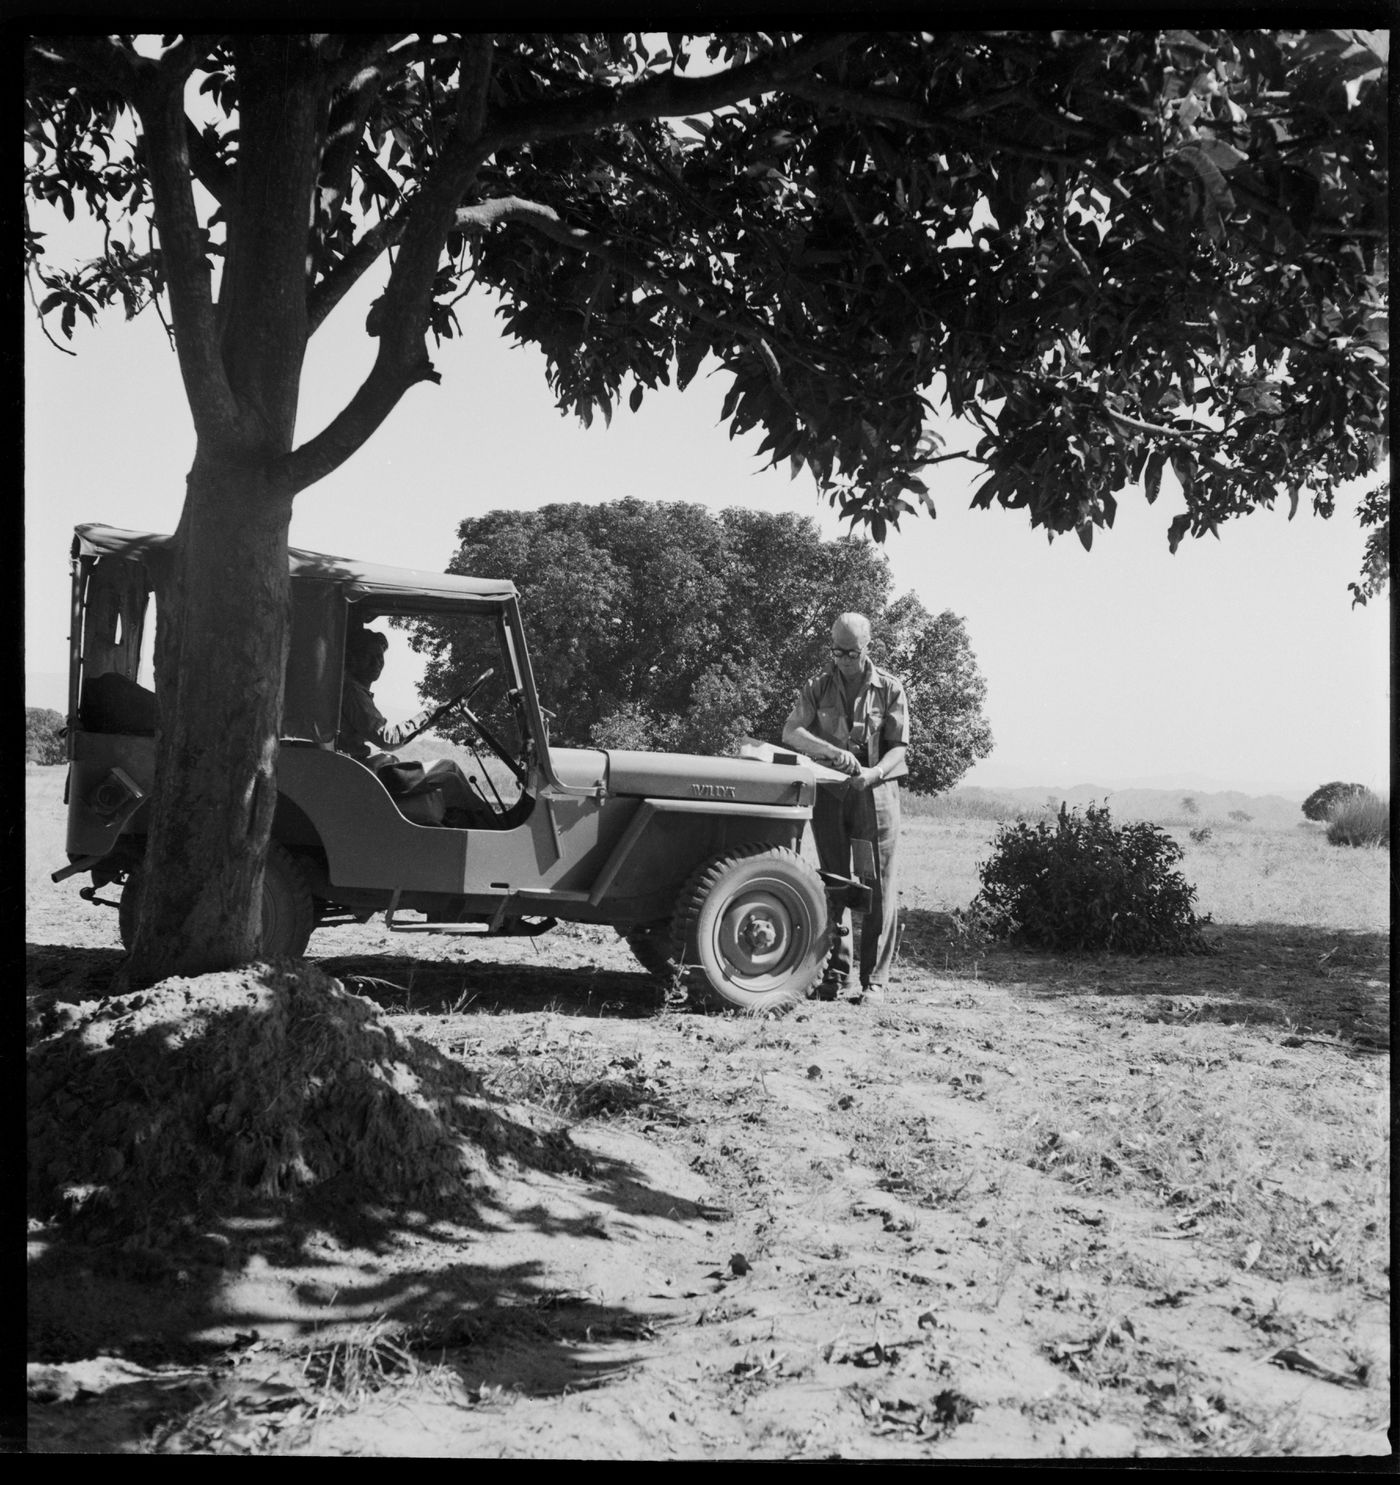 Pierre Jeanneret standing in front of a jeep under a tree in Chandigarh, India